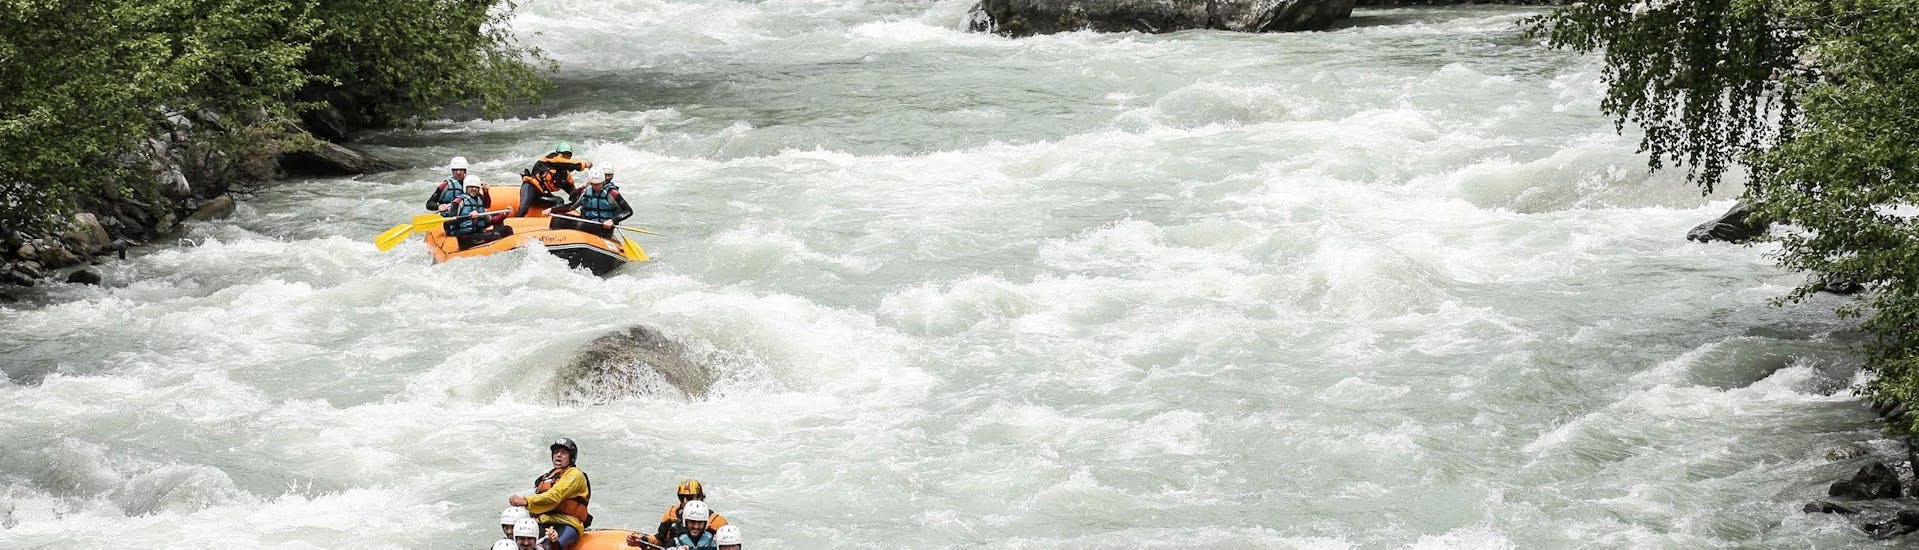 Everyday is a perfect day for the Rafting on the Dora Baltea for Beginners with RaftingIT Valle d'Aosta.